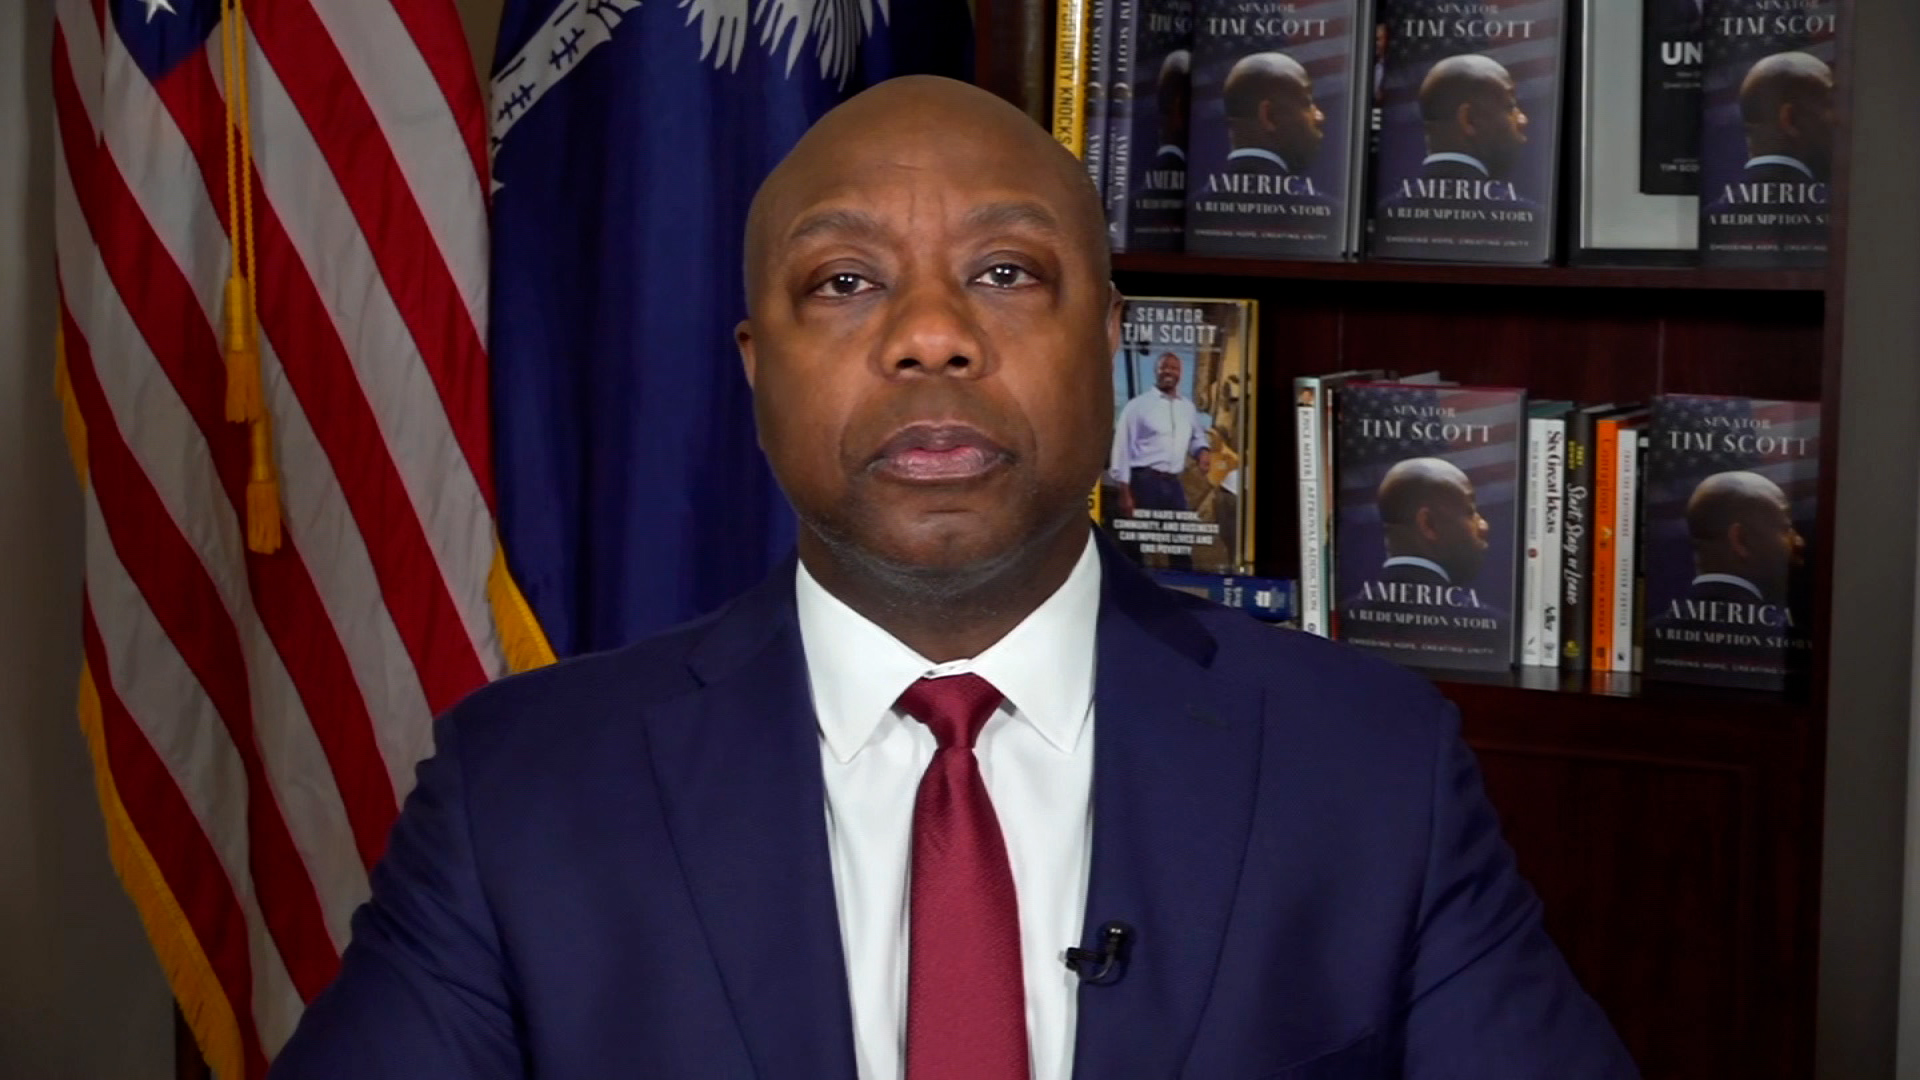 Sen. Tim Scott is pictured on CNN's "State of the Union" during an interview on January 21.